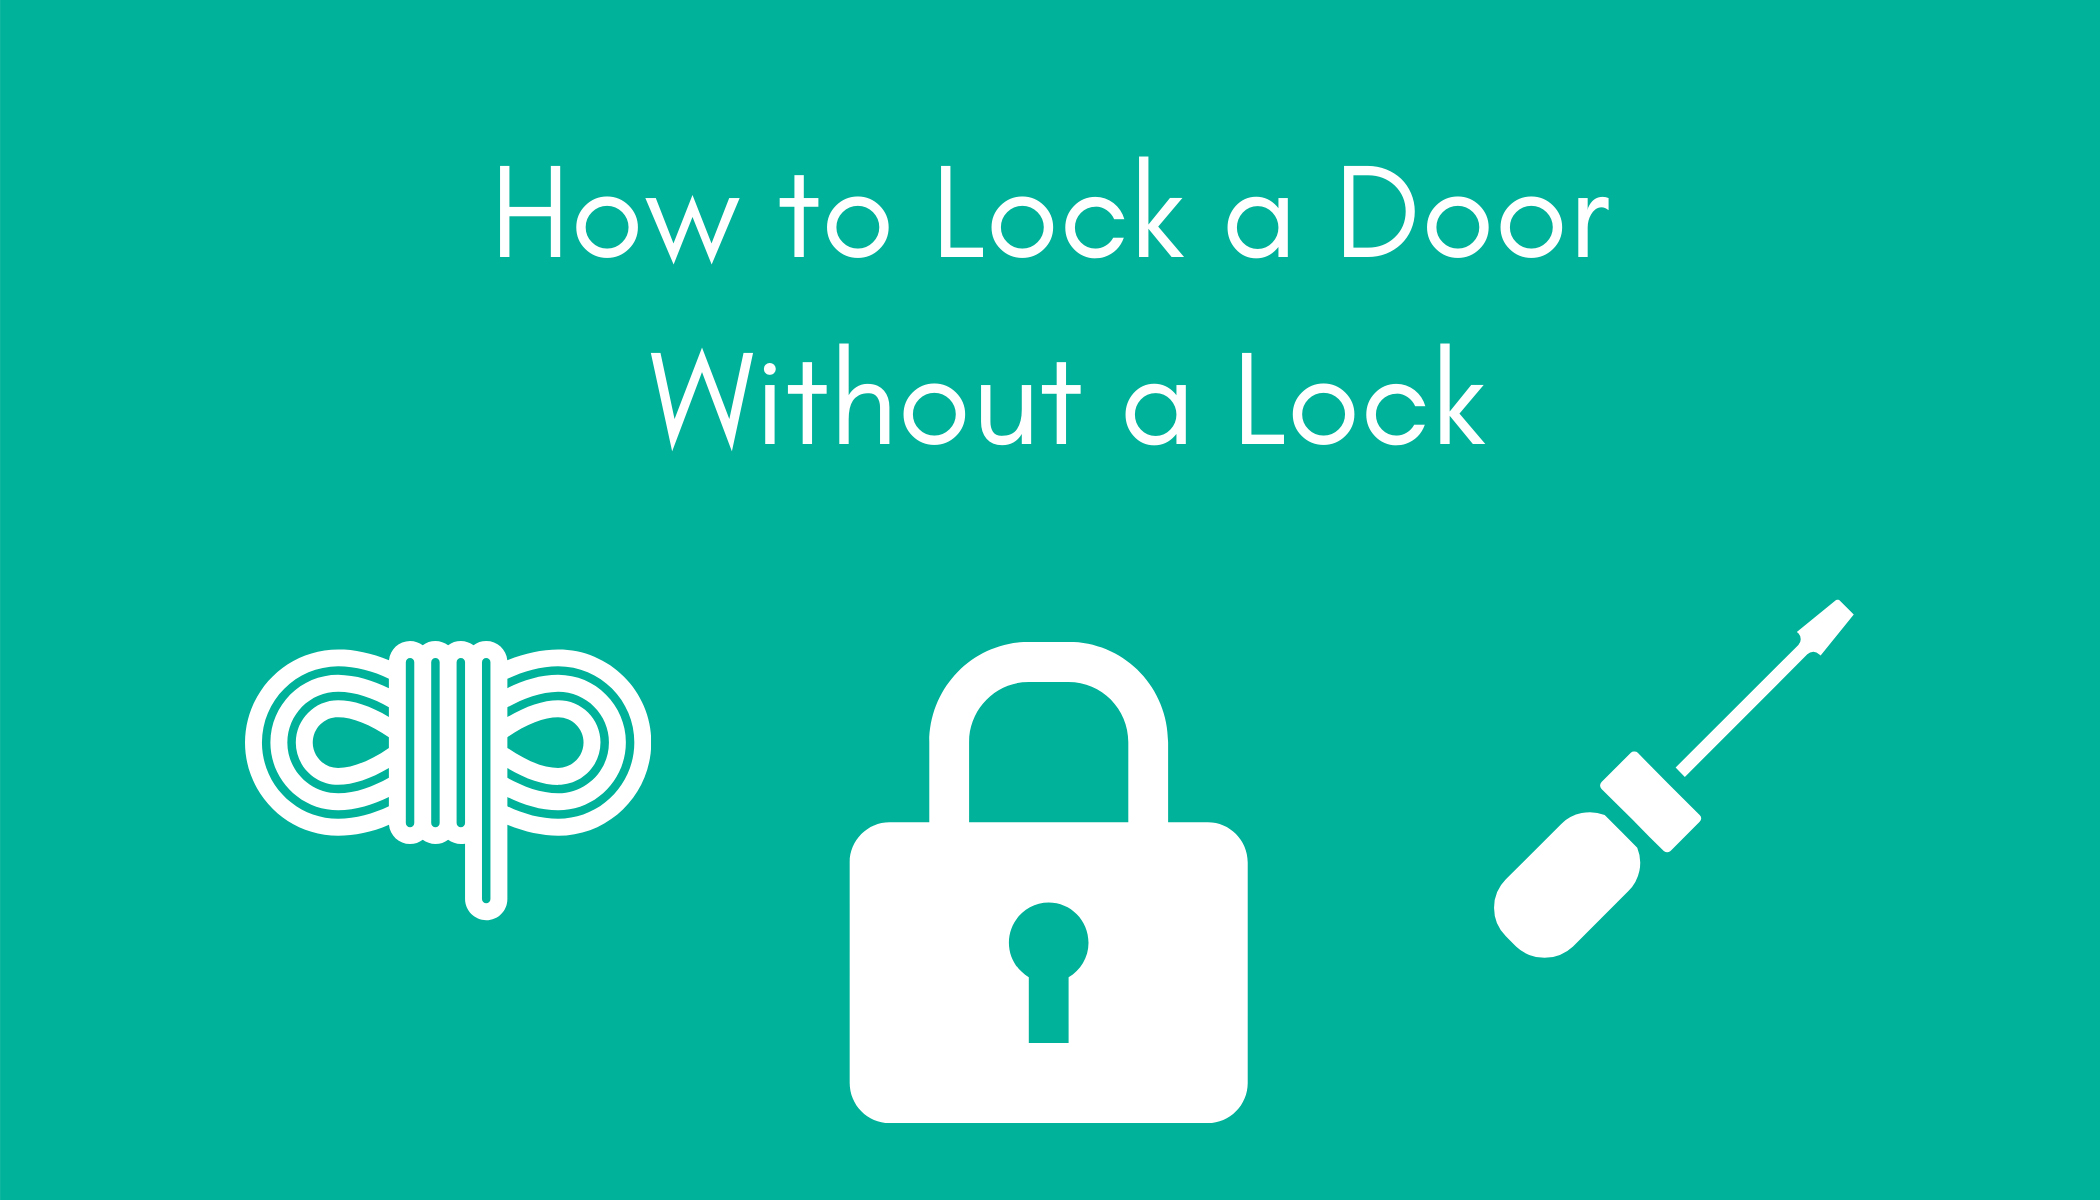 How To Lock a Door with a lock, screwdriver, and rope.